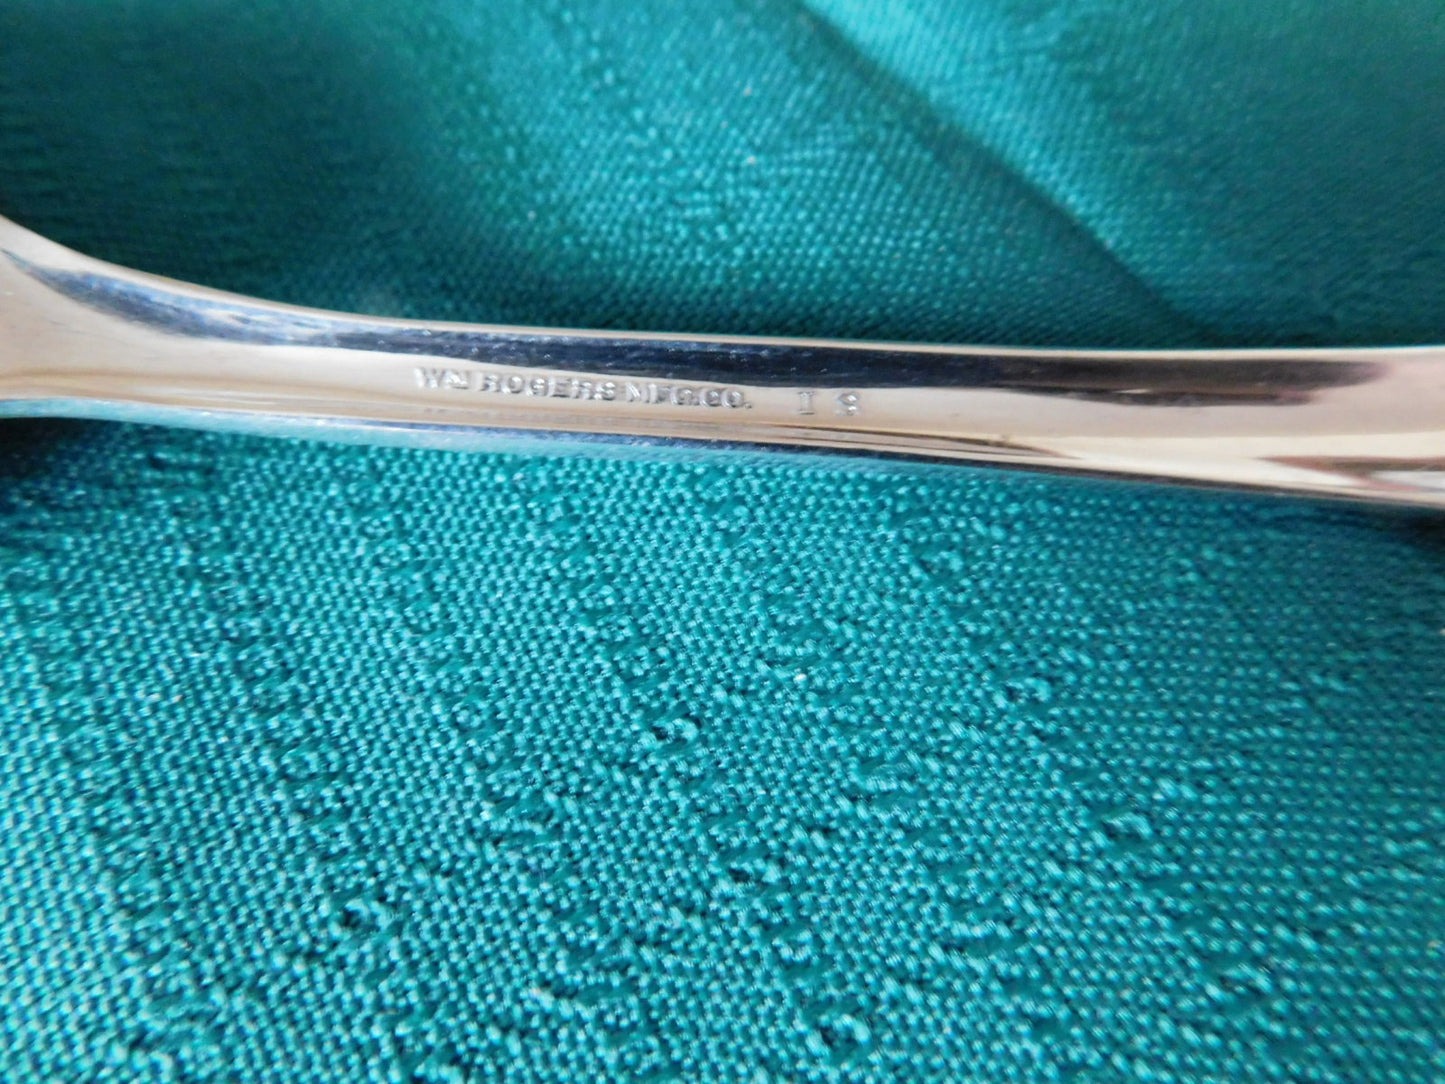 Wm. Rogers Mfg. Meadow Flower (1940) place oval soup spoon VGU - Items Tried And True